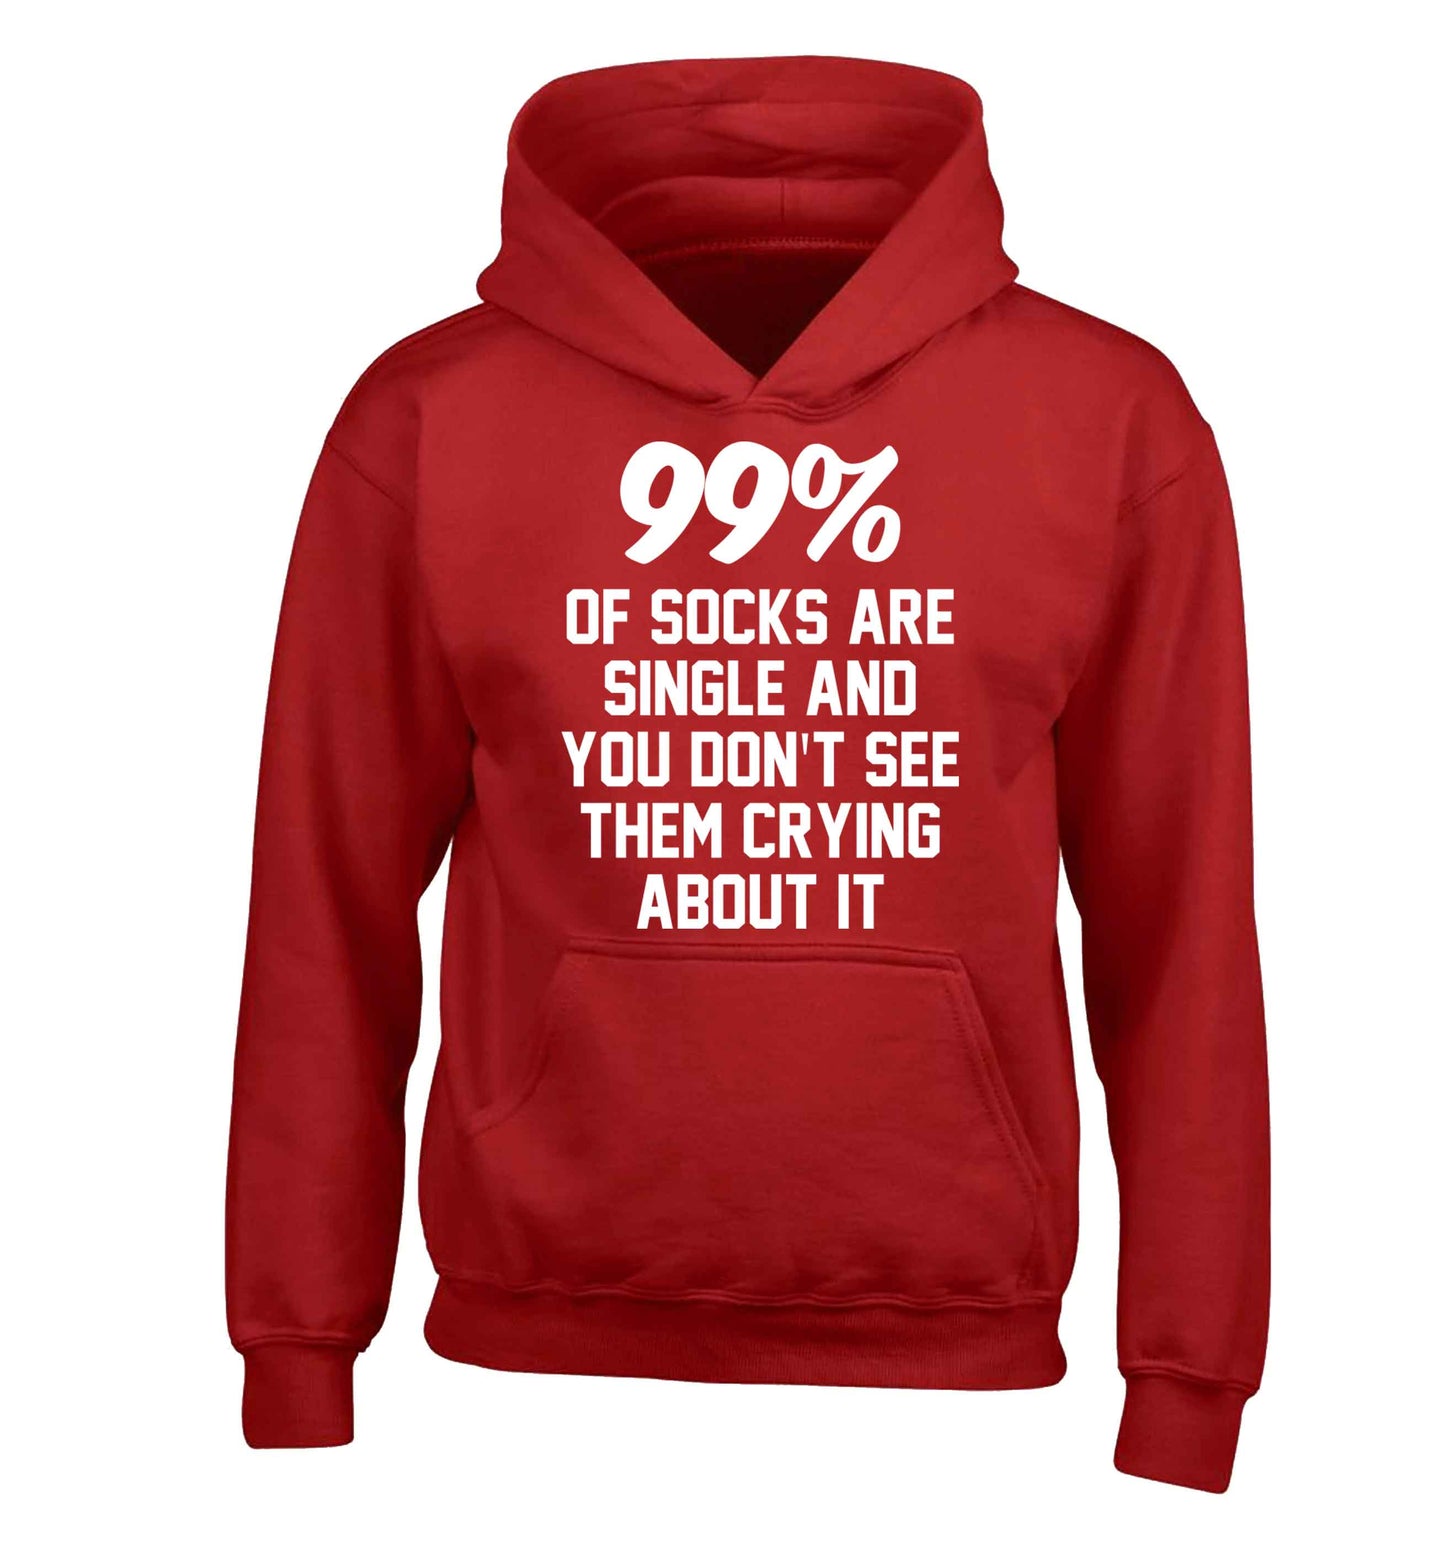 99% of socks are single and you don't see them crying about it children's red hoodie 12-13 Years